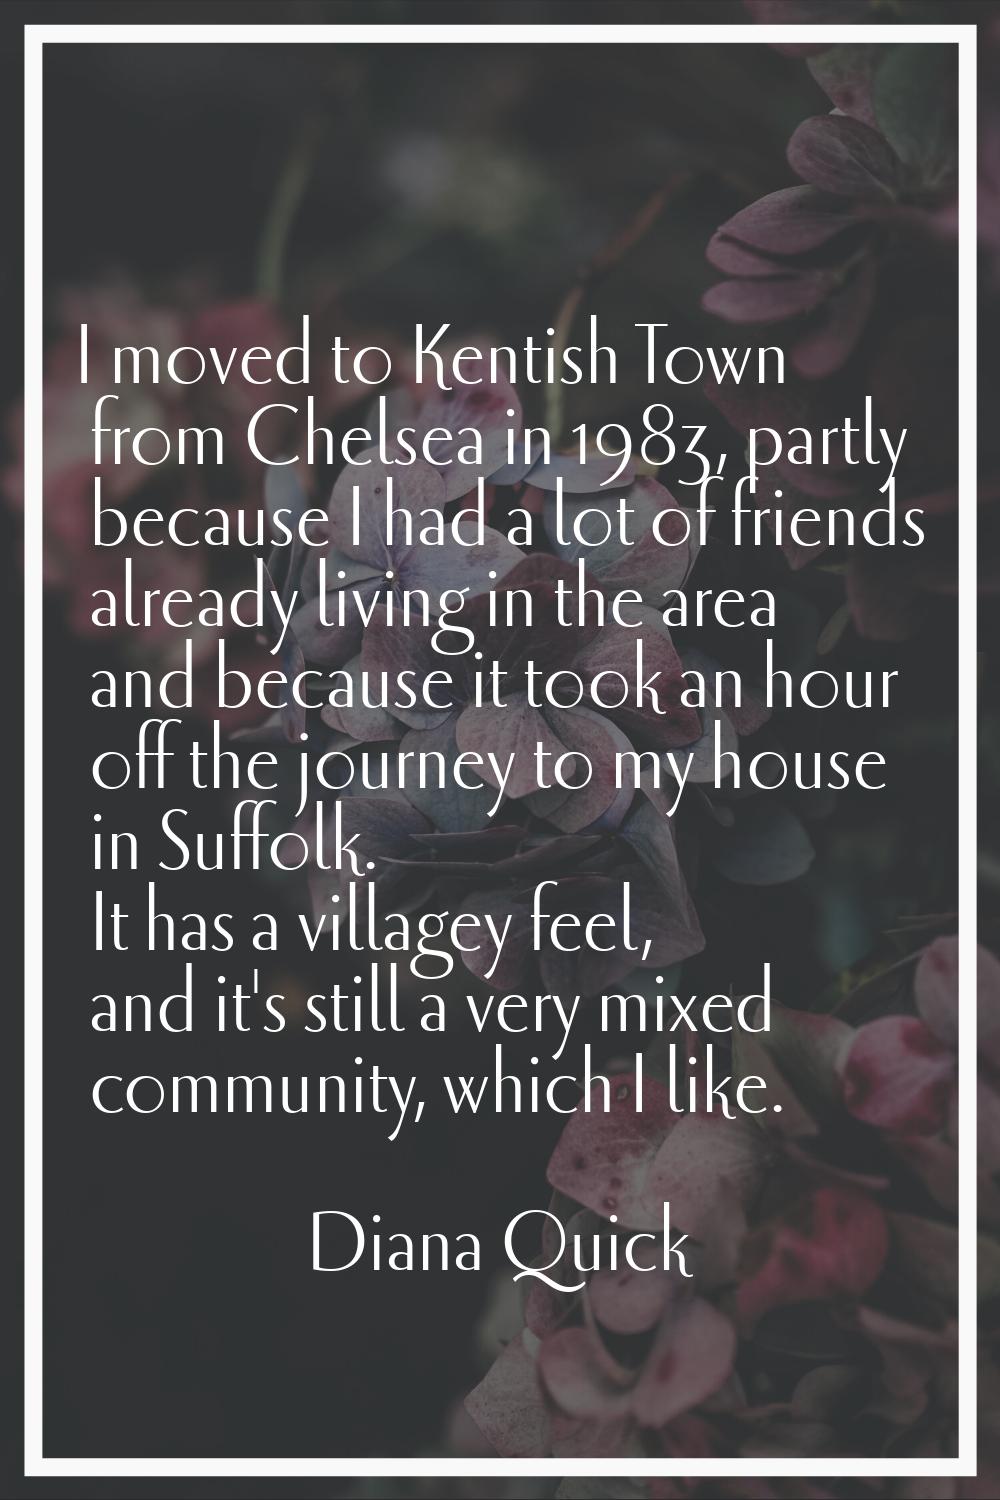 I moved to Kentish Town from Chelsea in 1983, partly because I had a lot of friends already living 